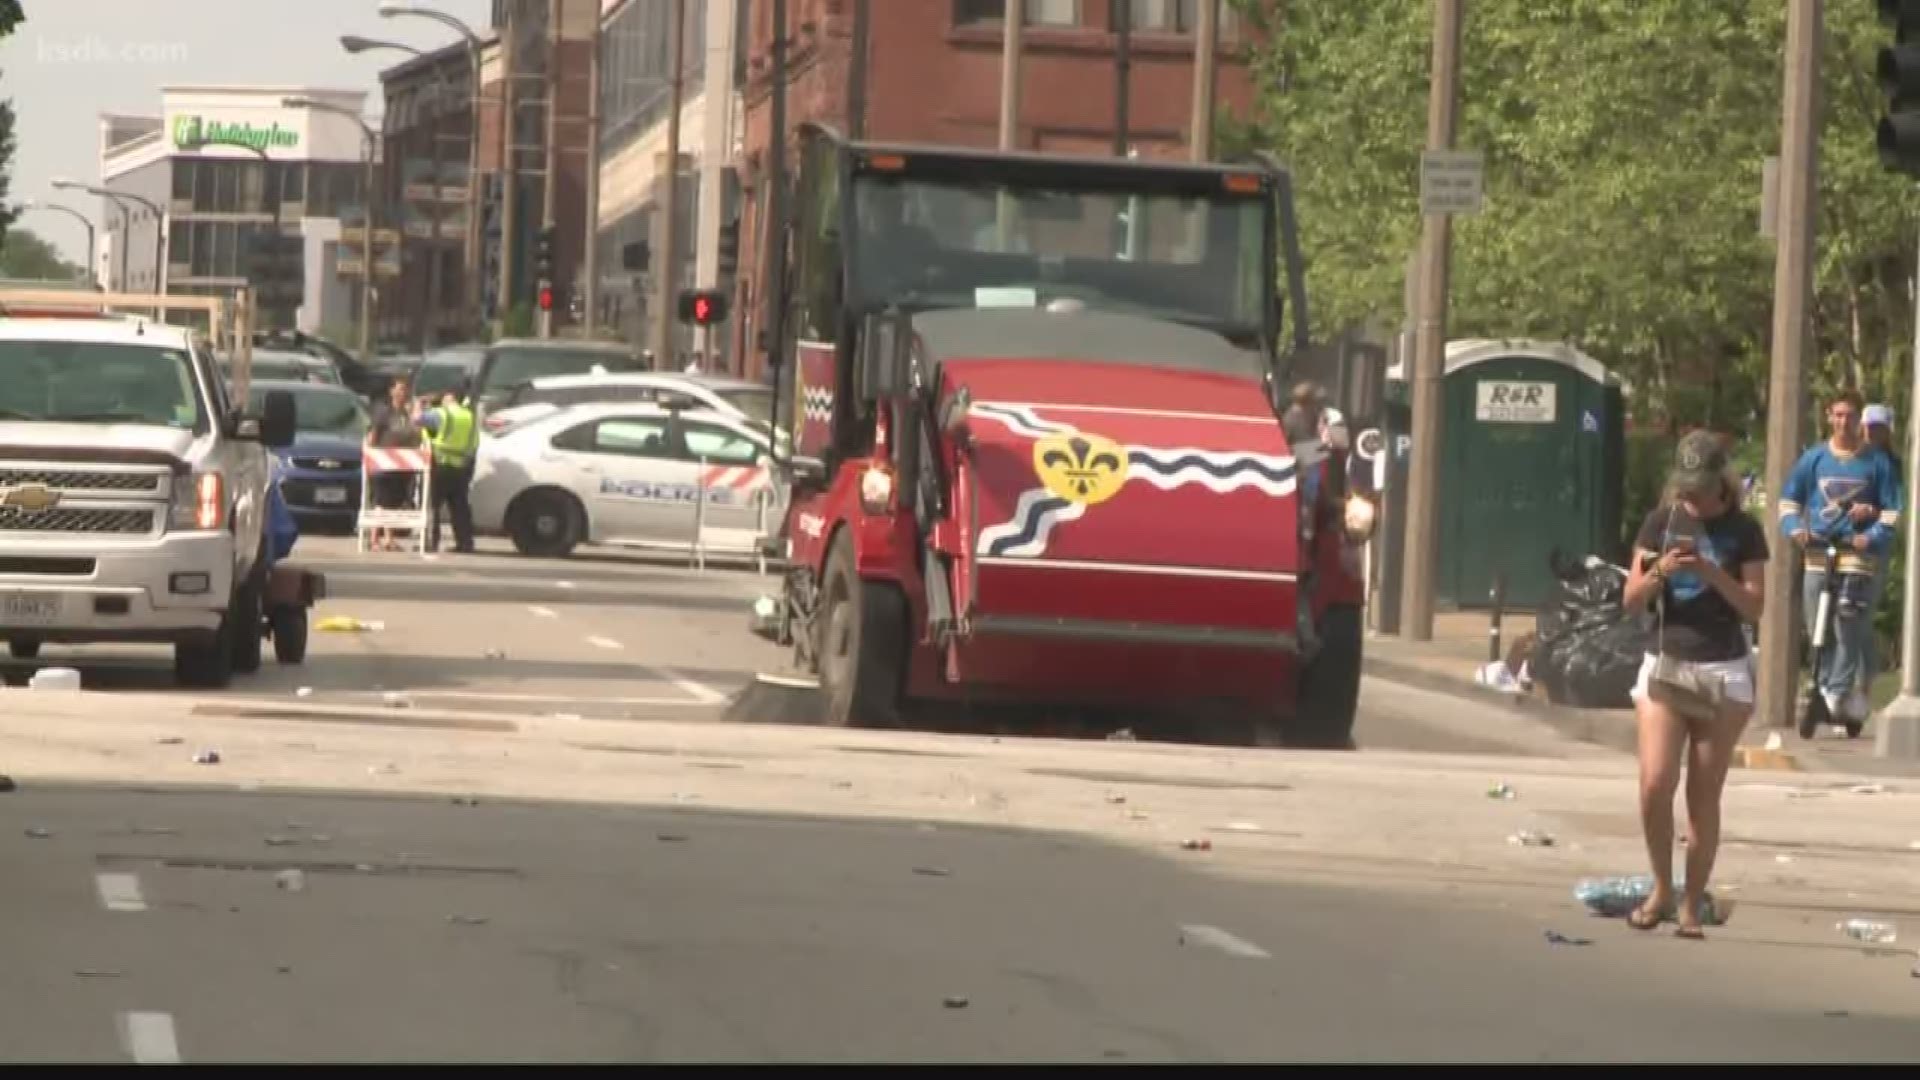 It took less than 24 hours for the streets to return back to normal in St. Louis.